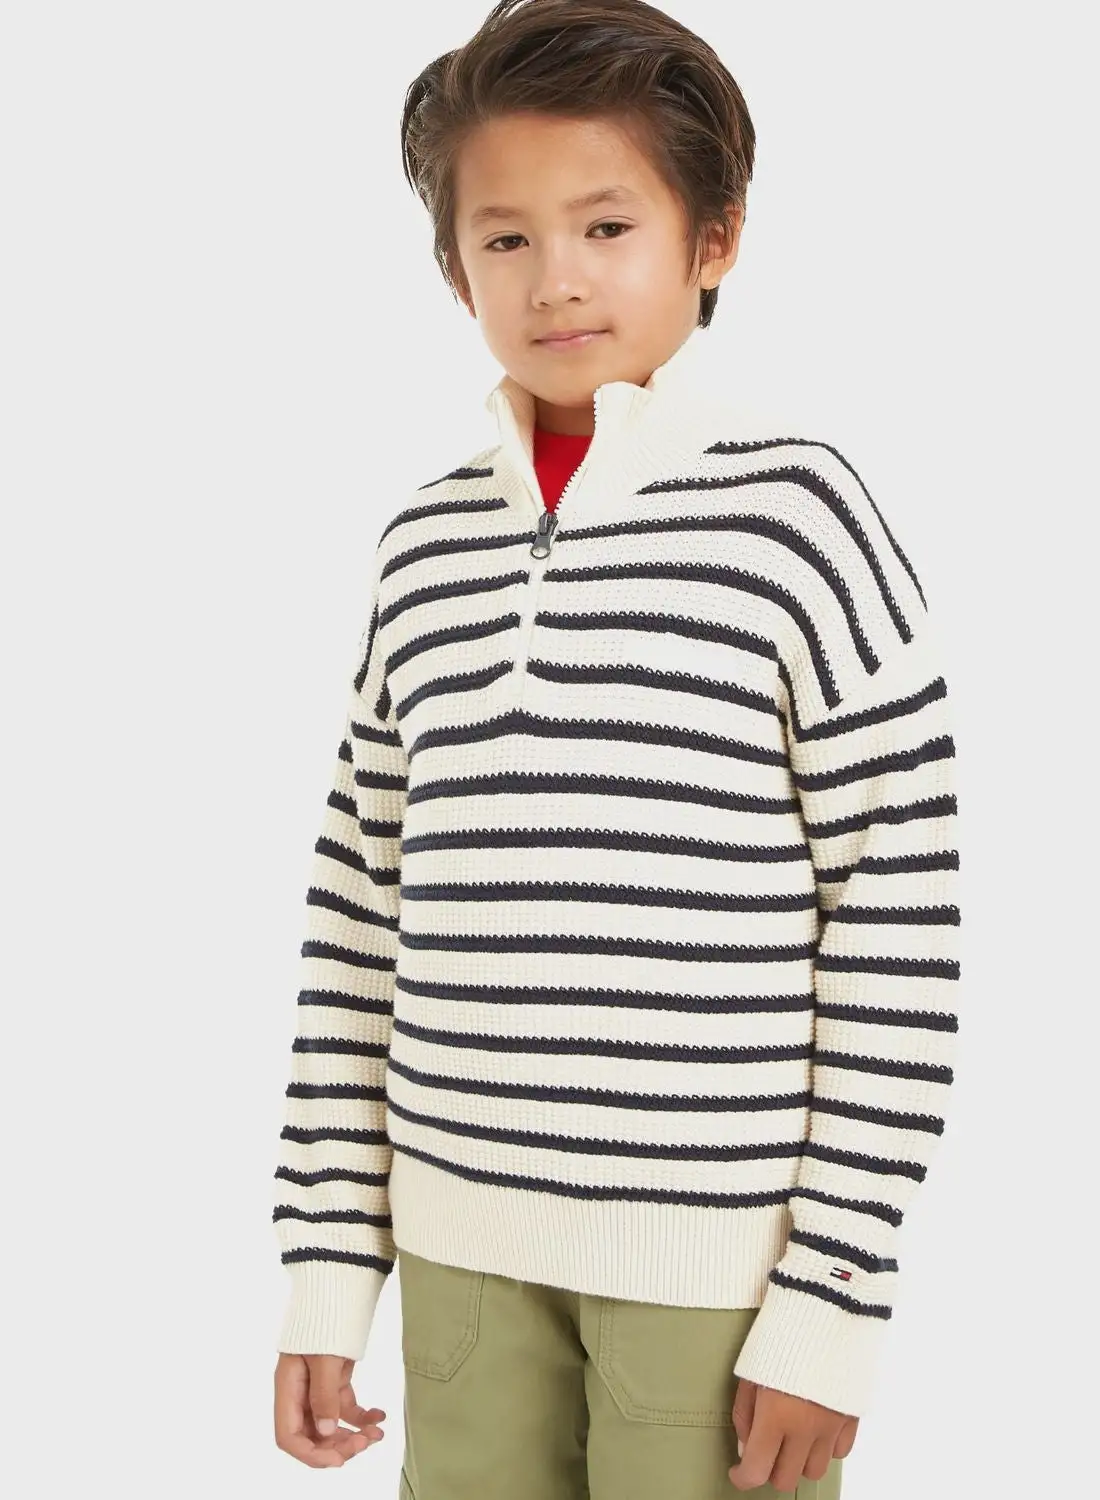 TOMMY HILFIGER Youth Striped Half Zip Sweater